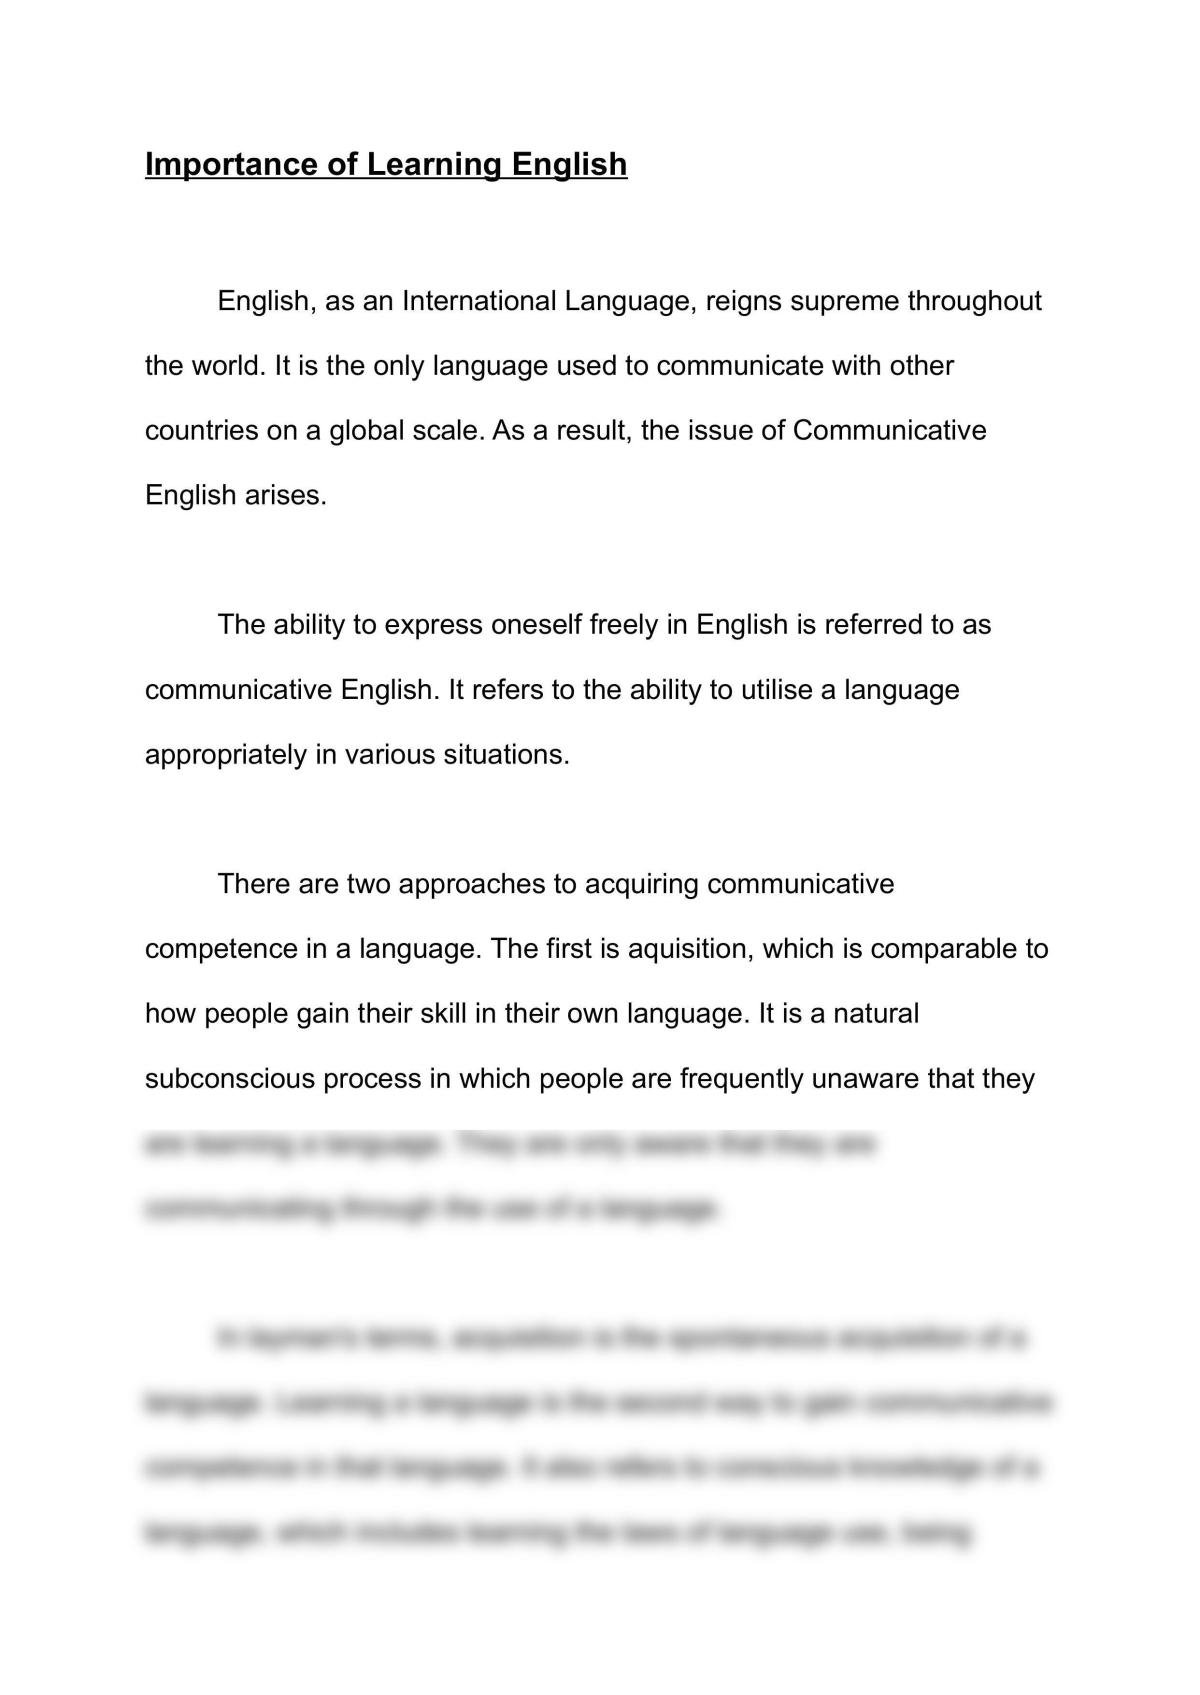 essay about learning english